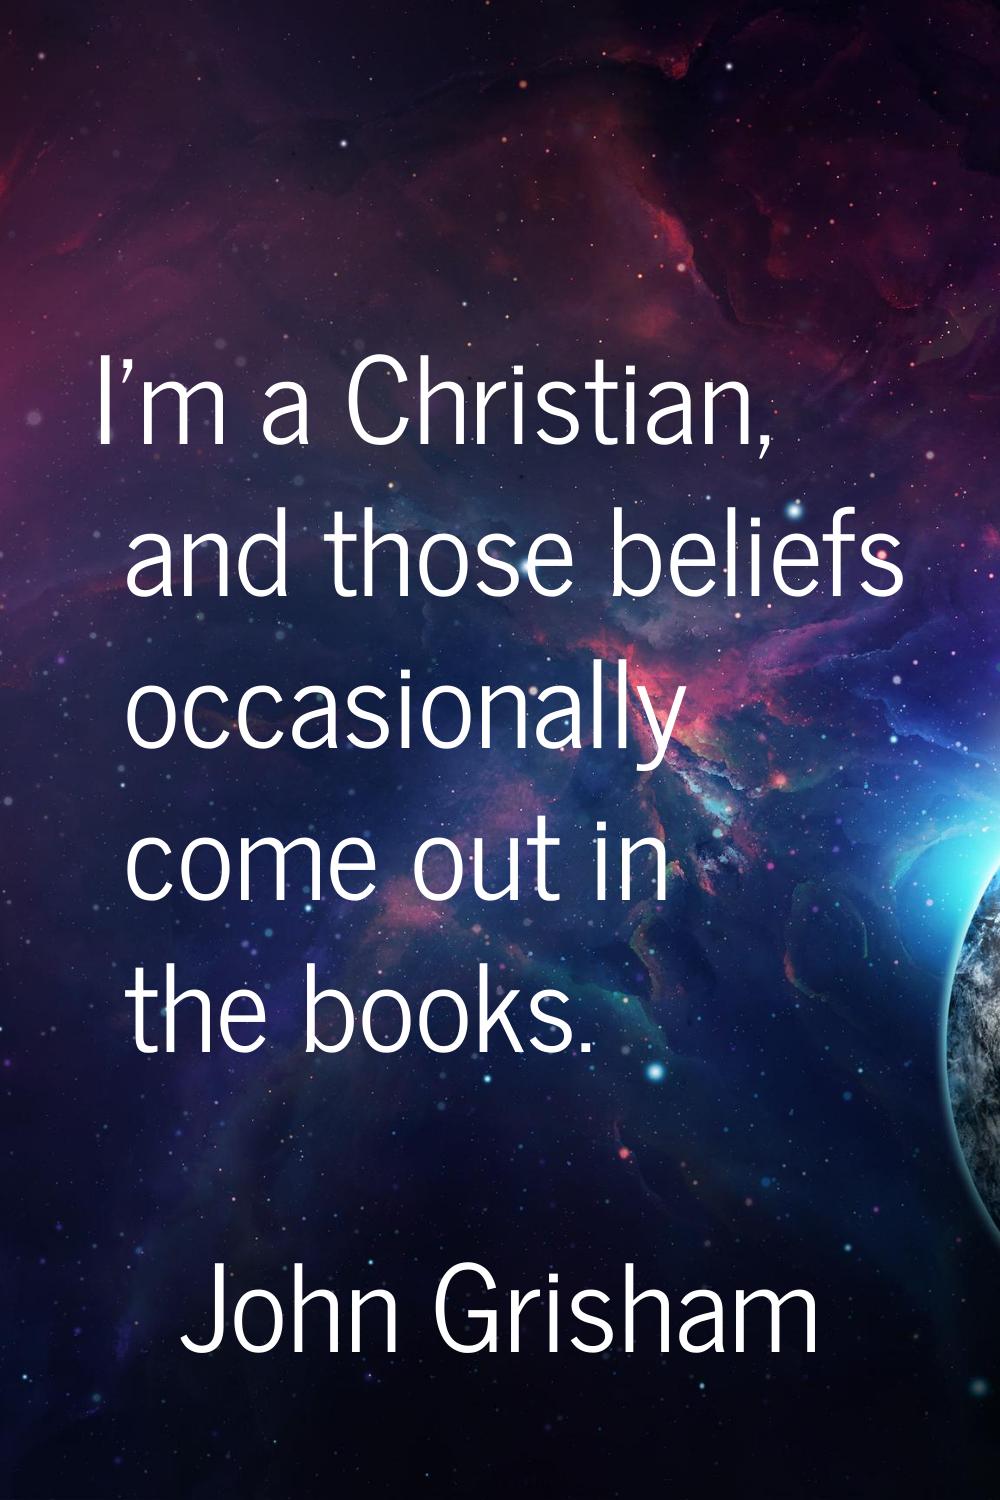 I'm a Christian, and those beliefs occasionally come out in the books.